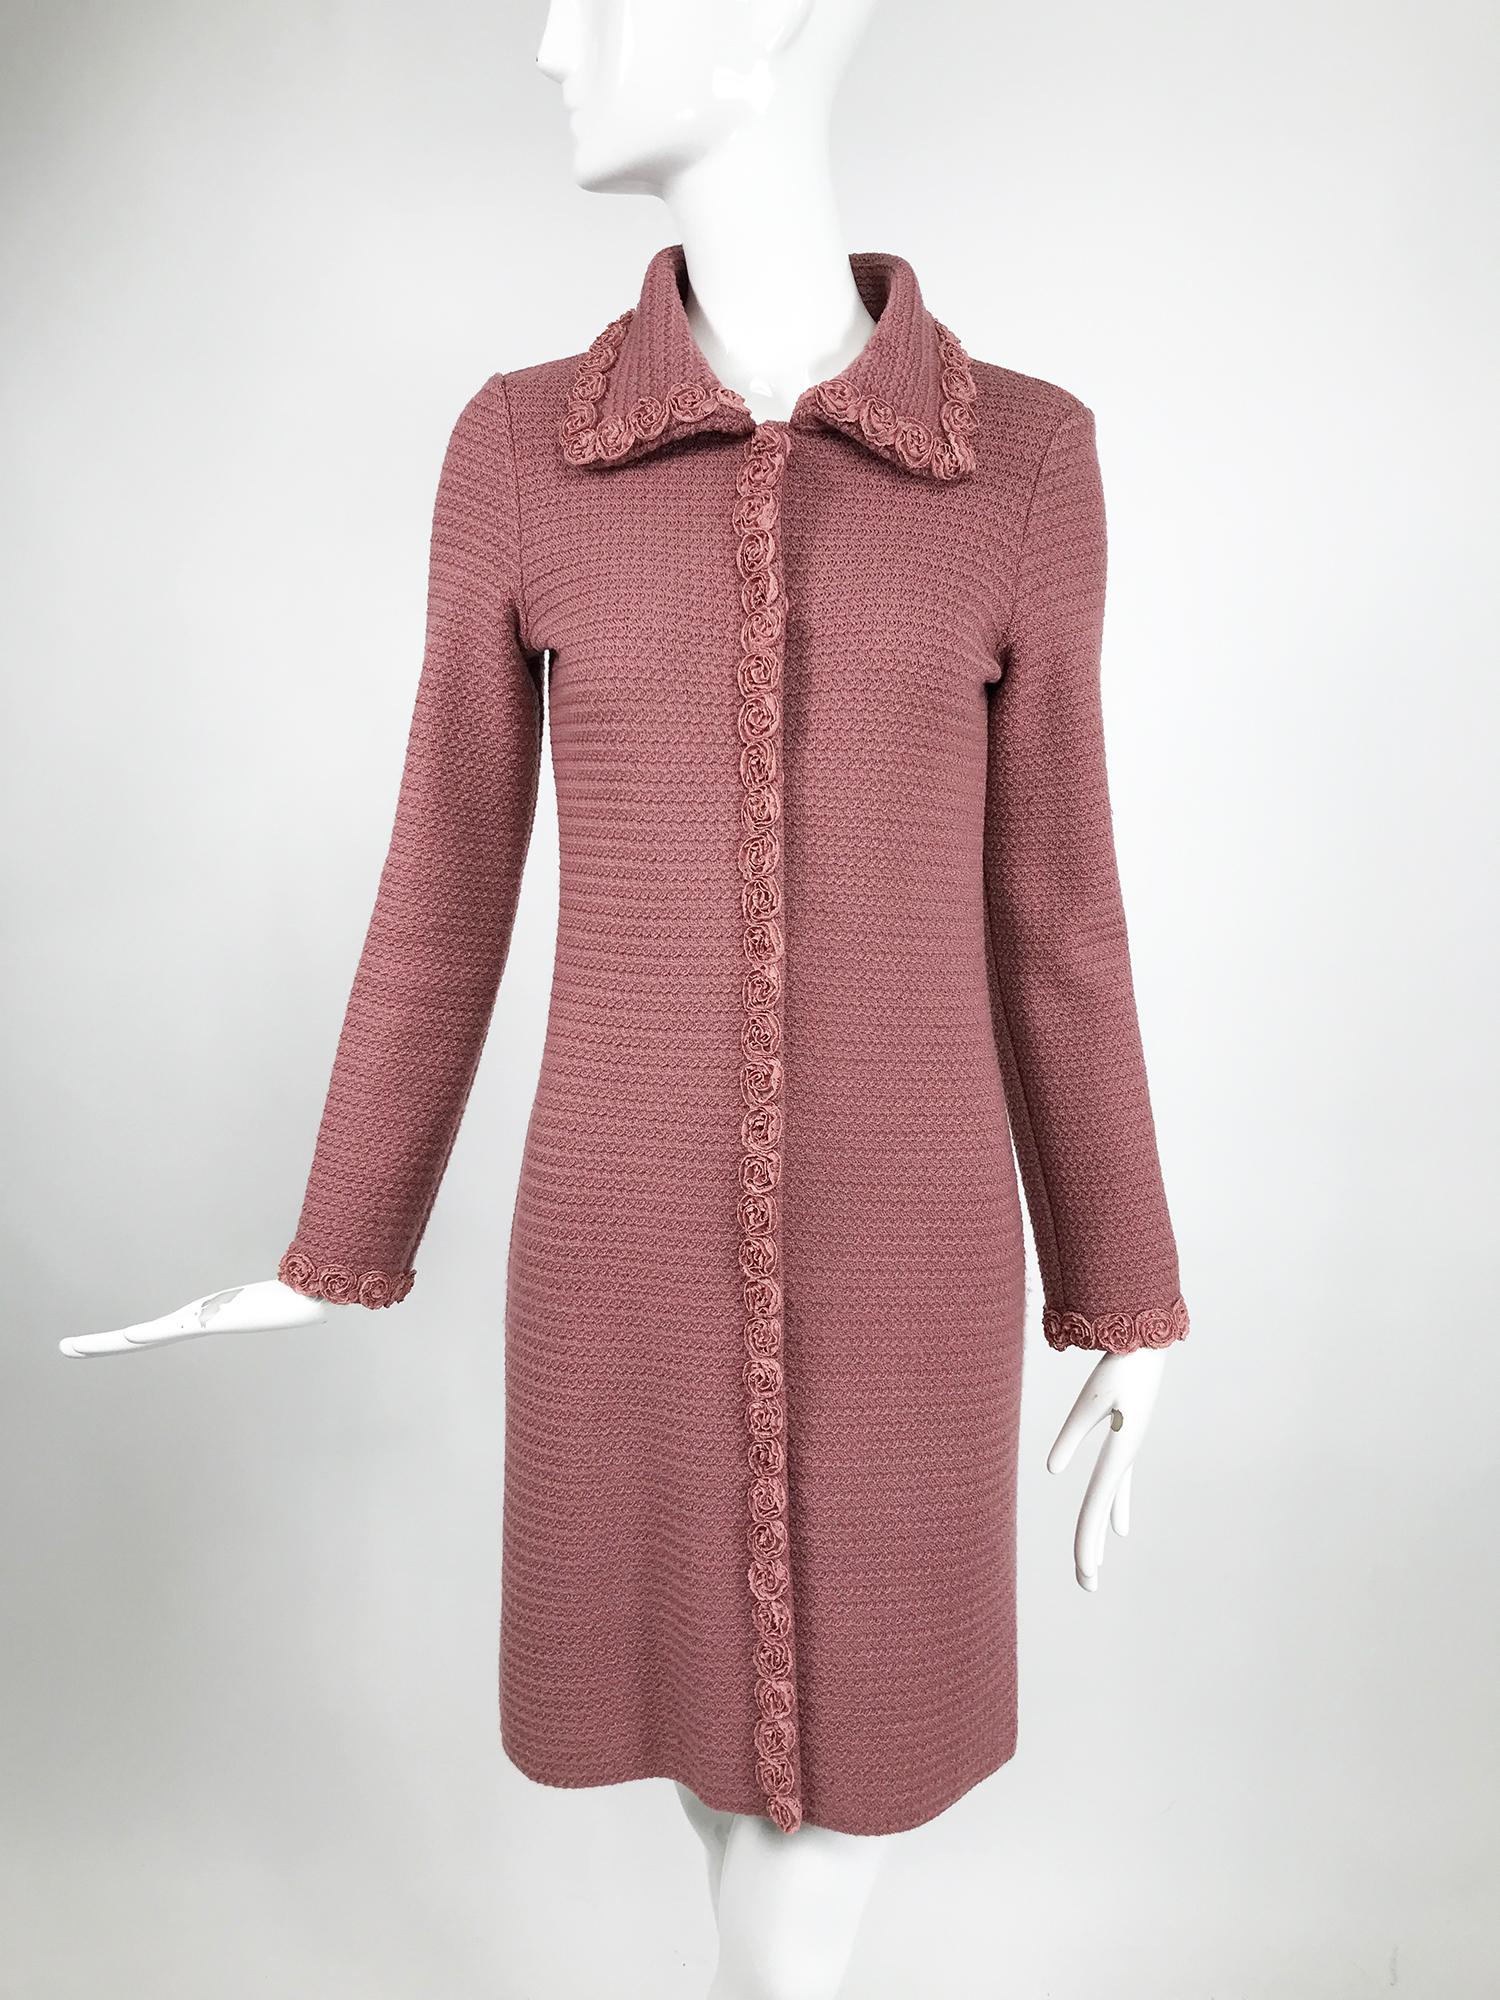 Moschino Pink Wool Knit Coat with Rosette Lace Trims 6